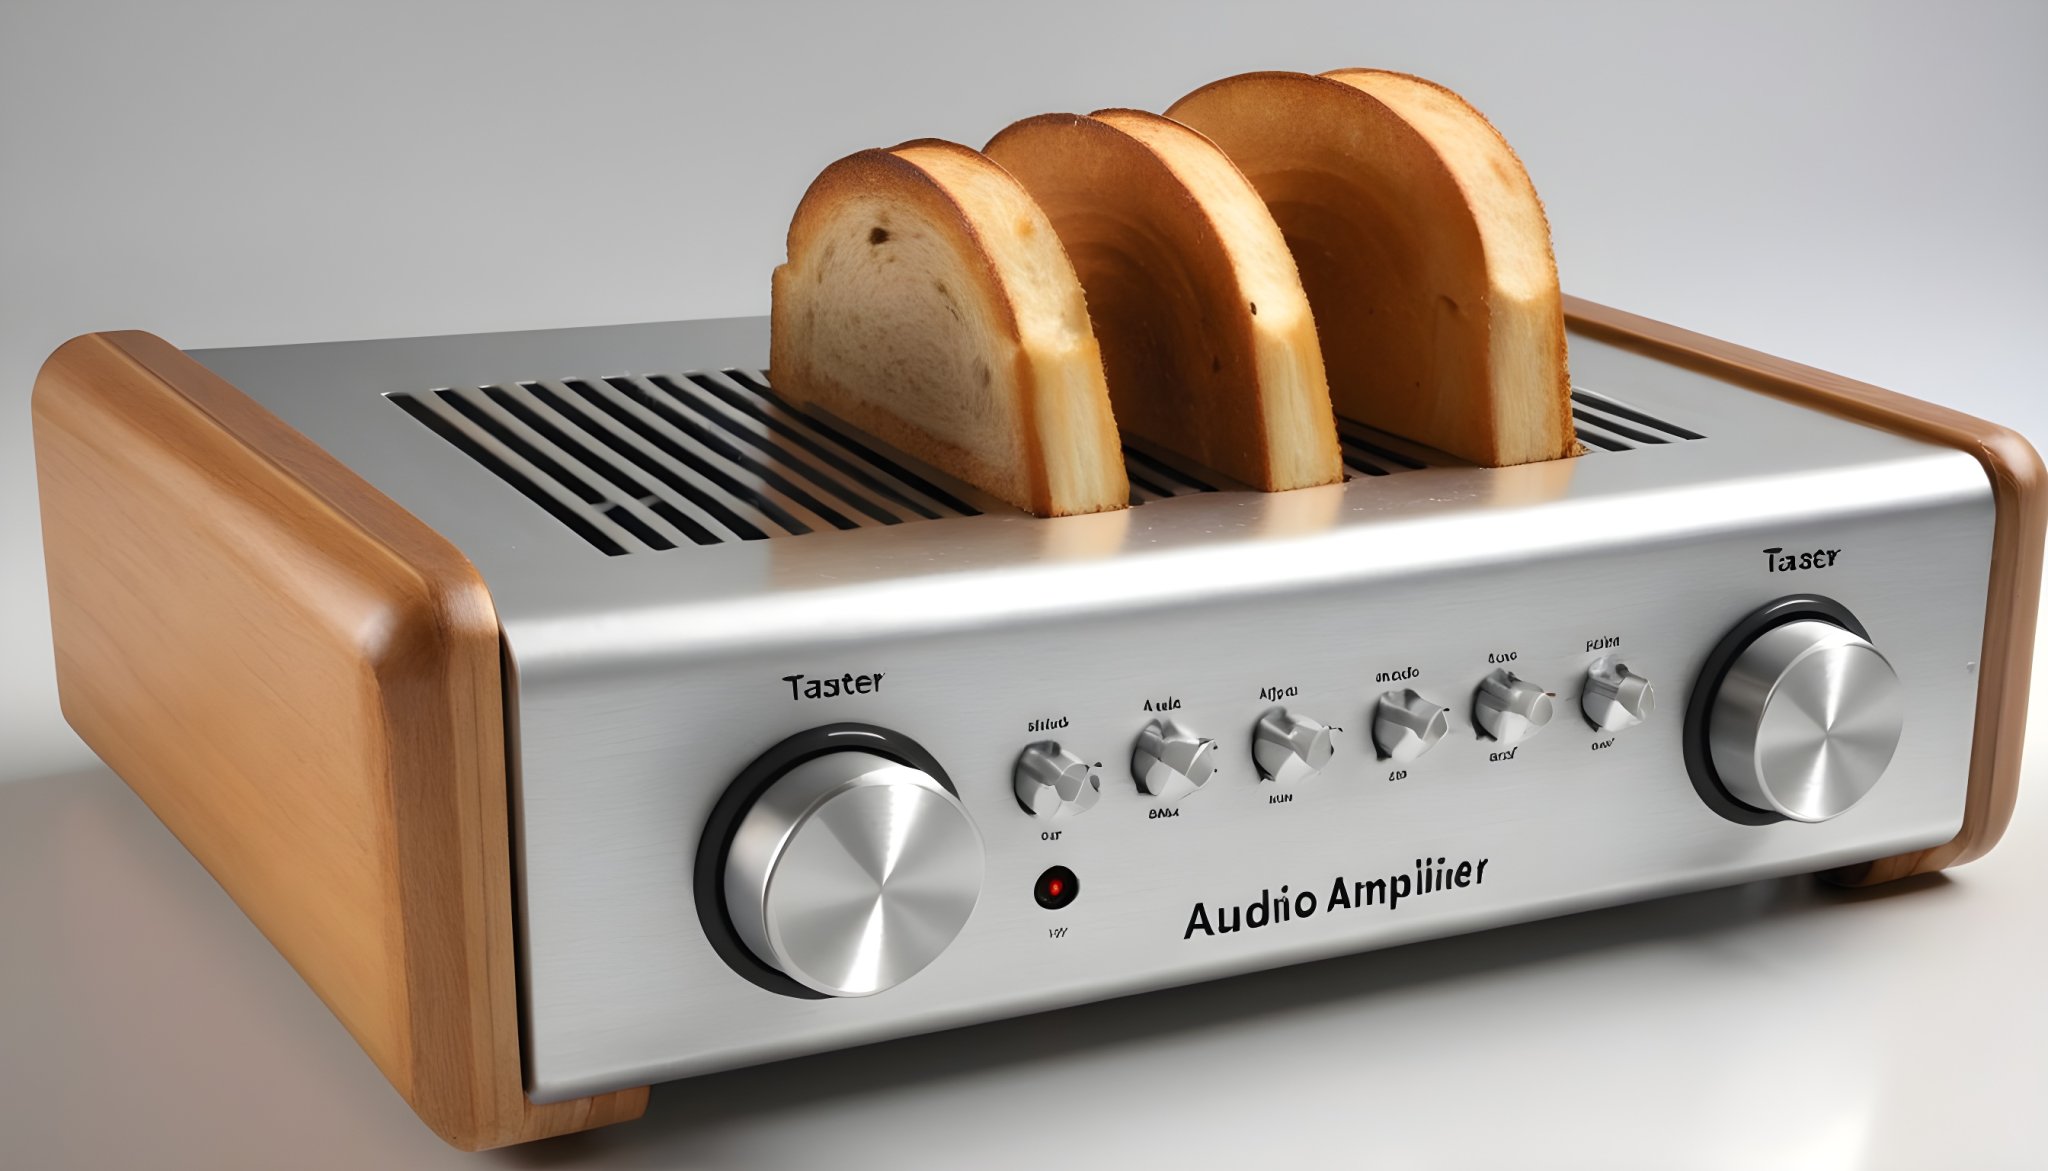 audio-amplifier-combined-with-a-toaster-upscaled.jpg